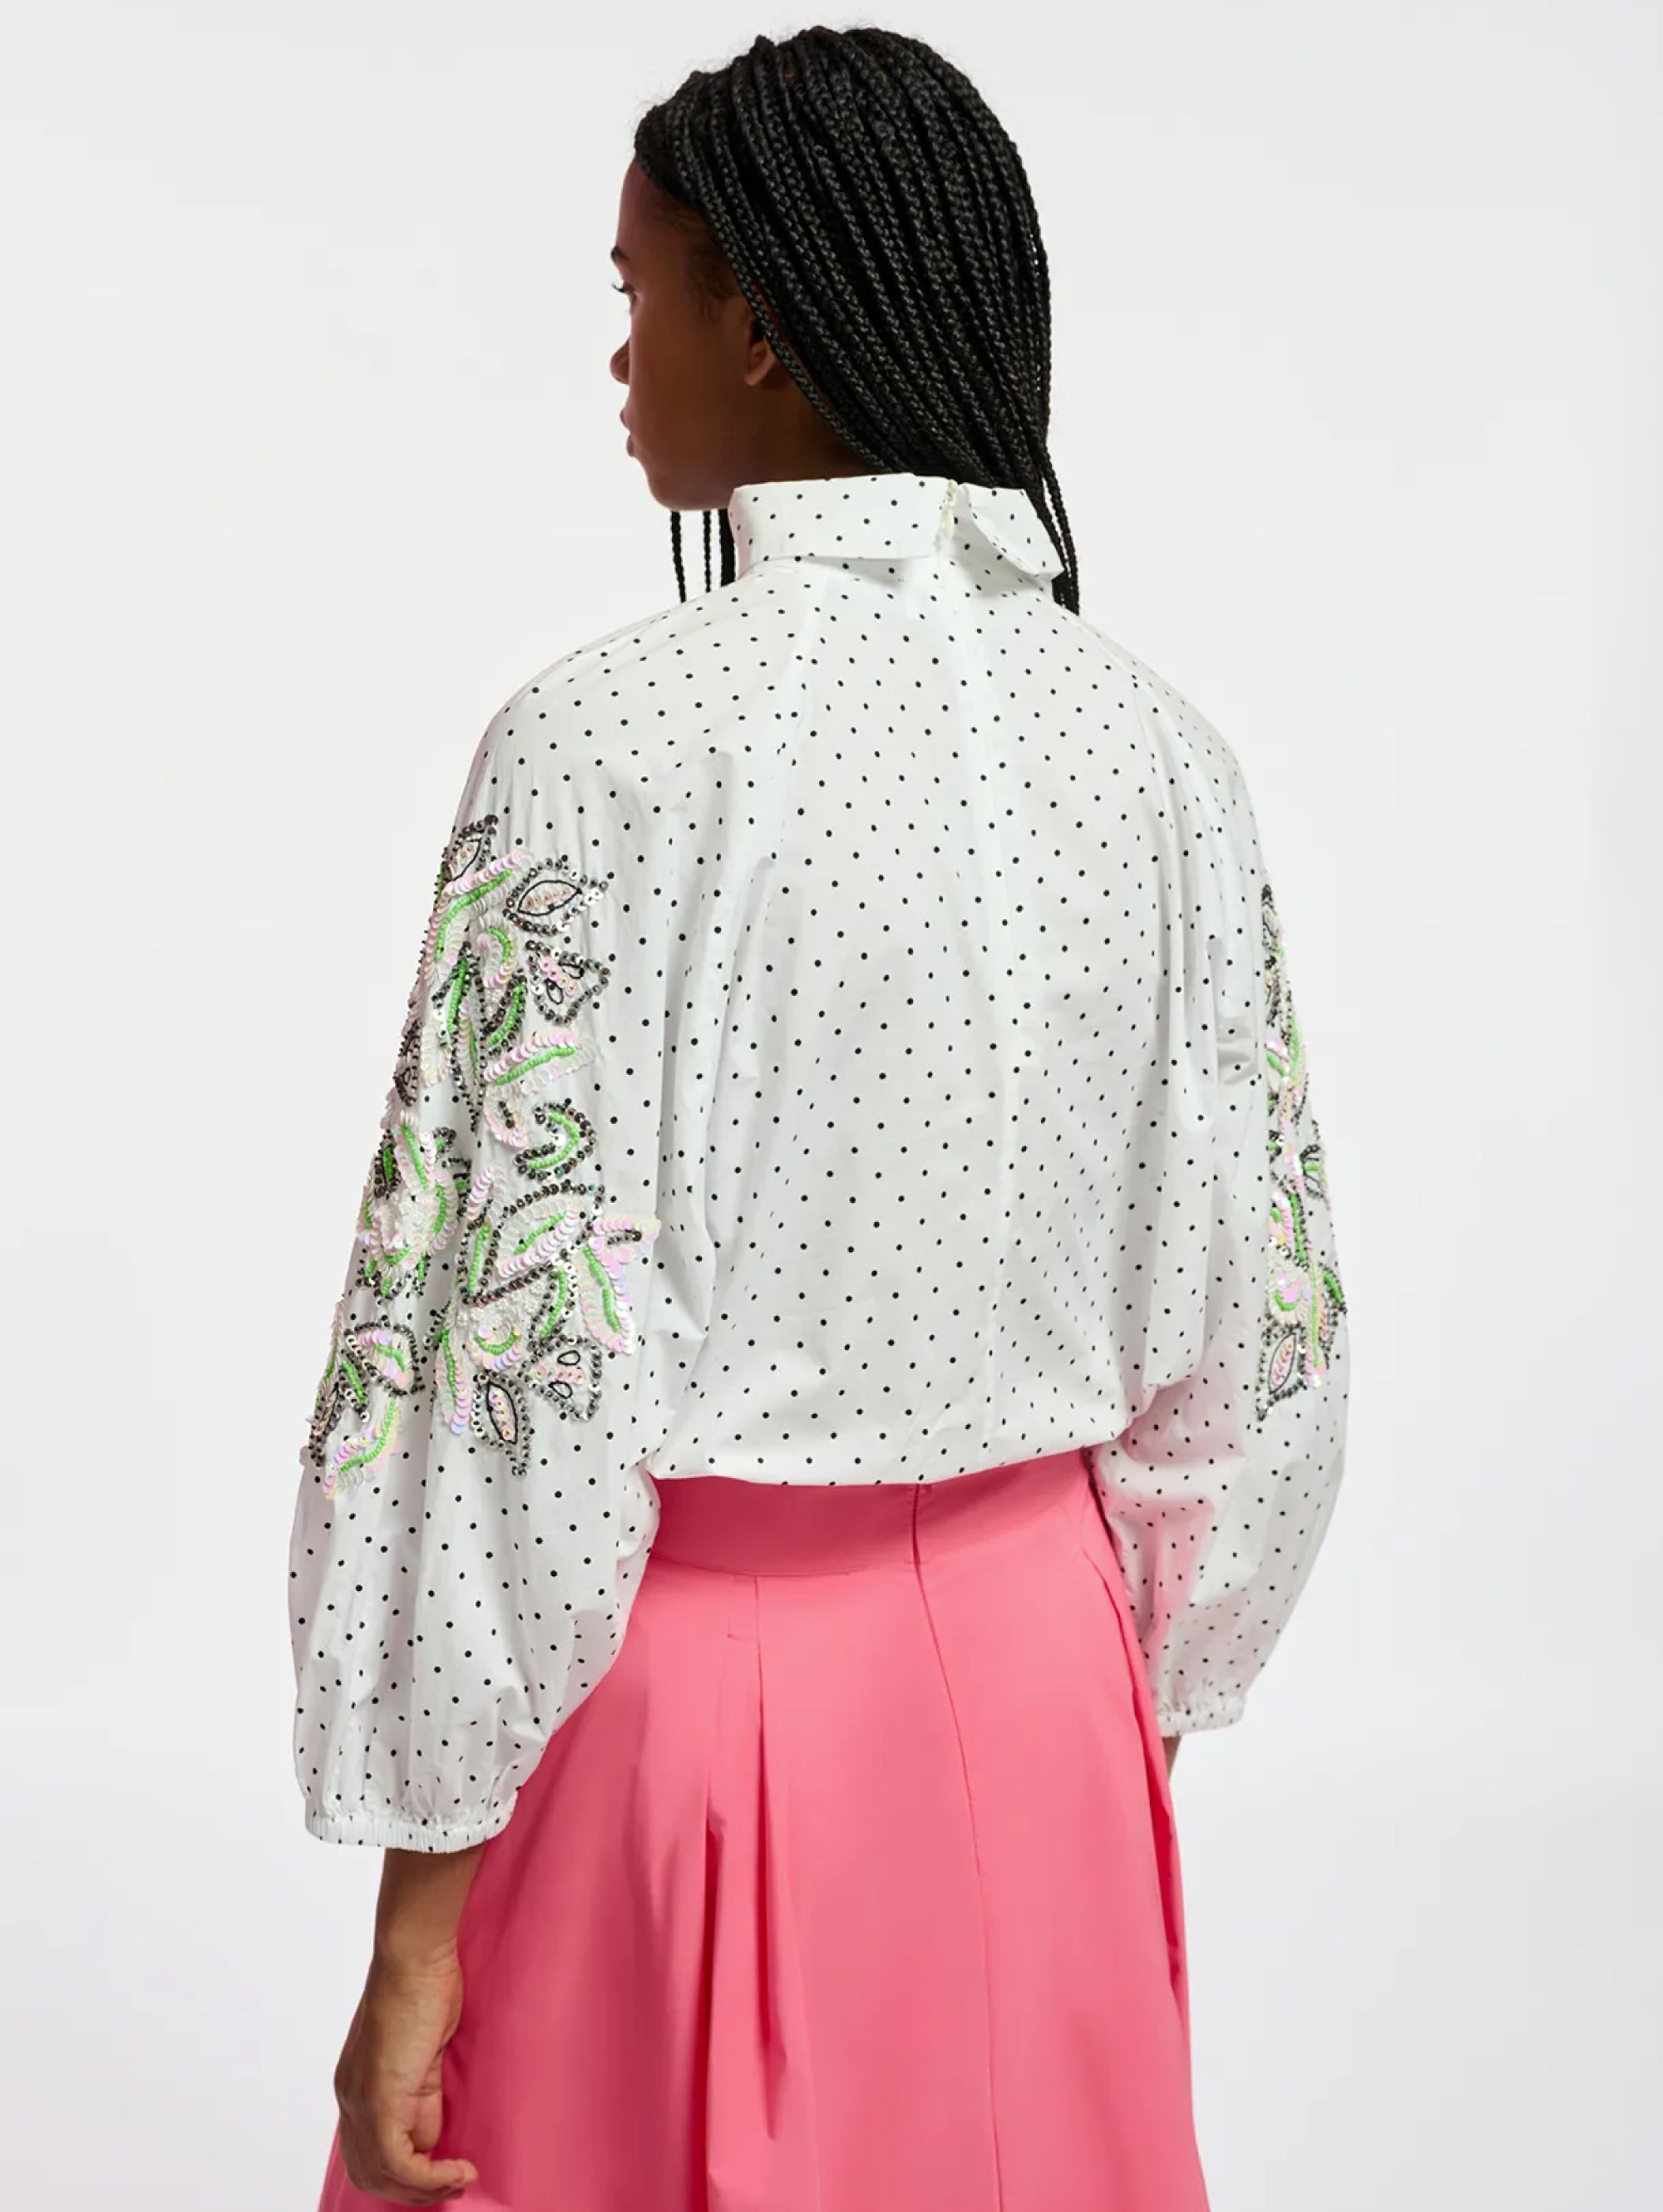 Polka Dot Blouse with White Embroidery